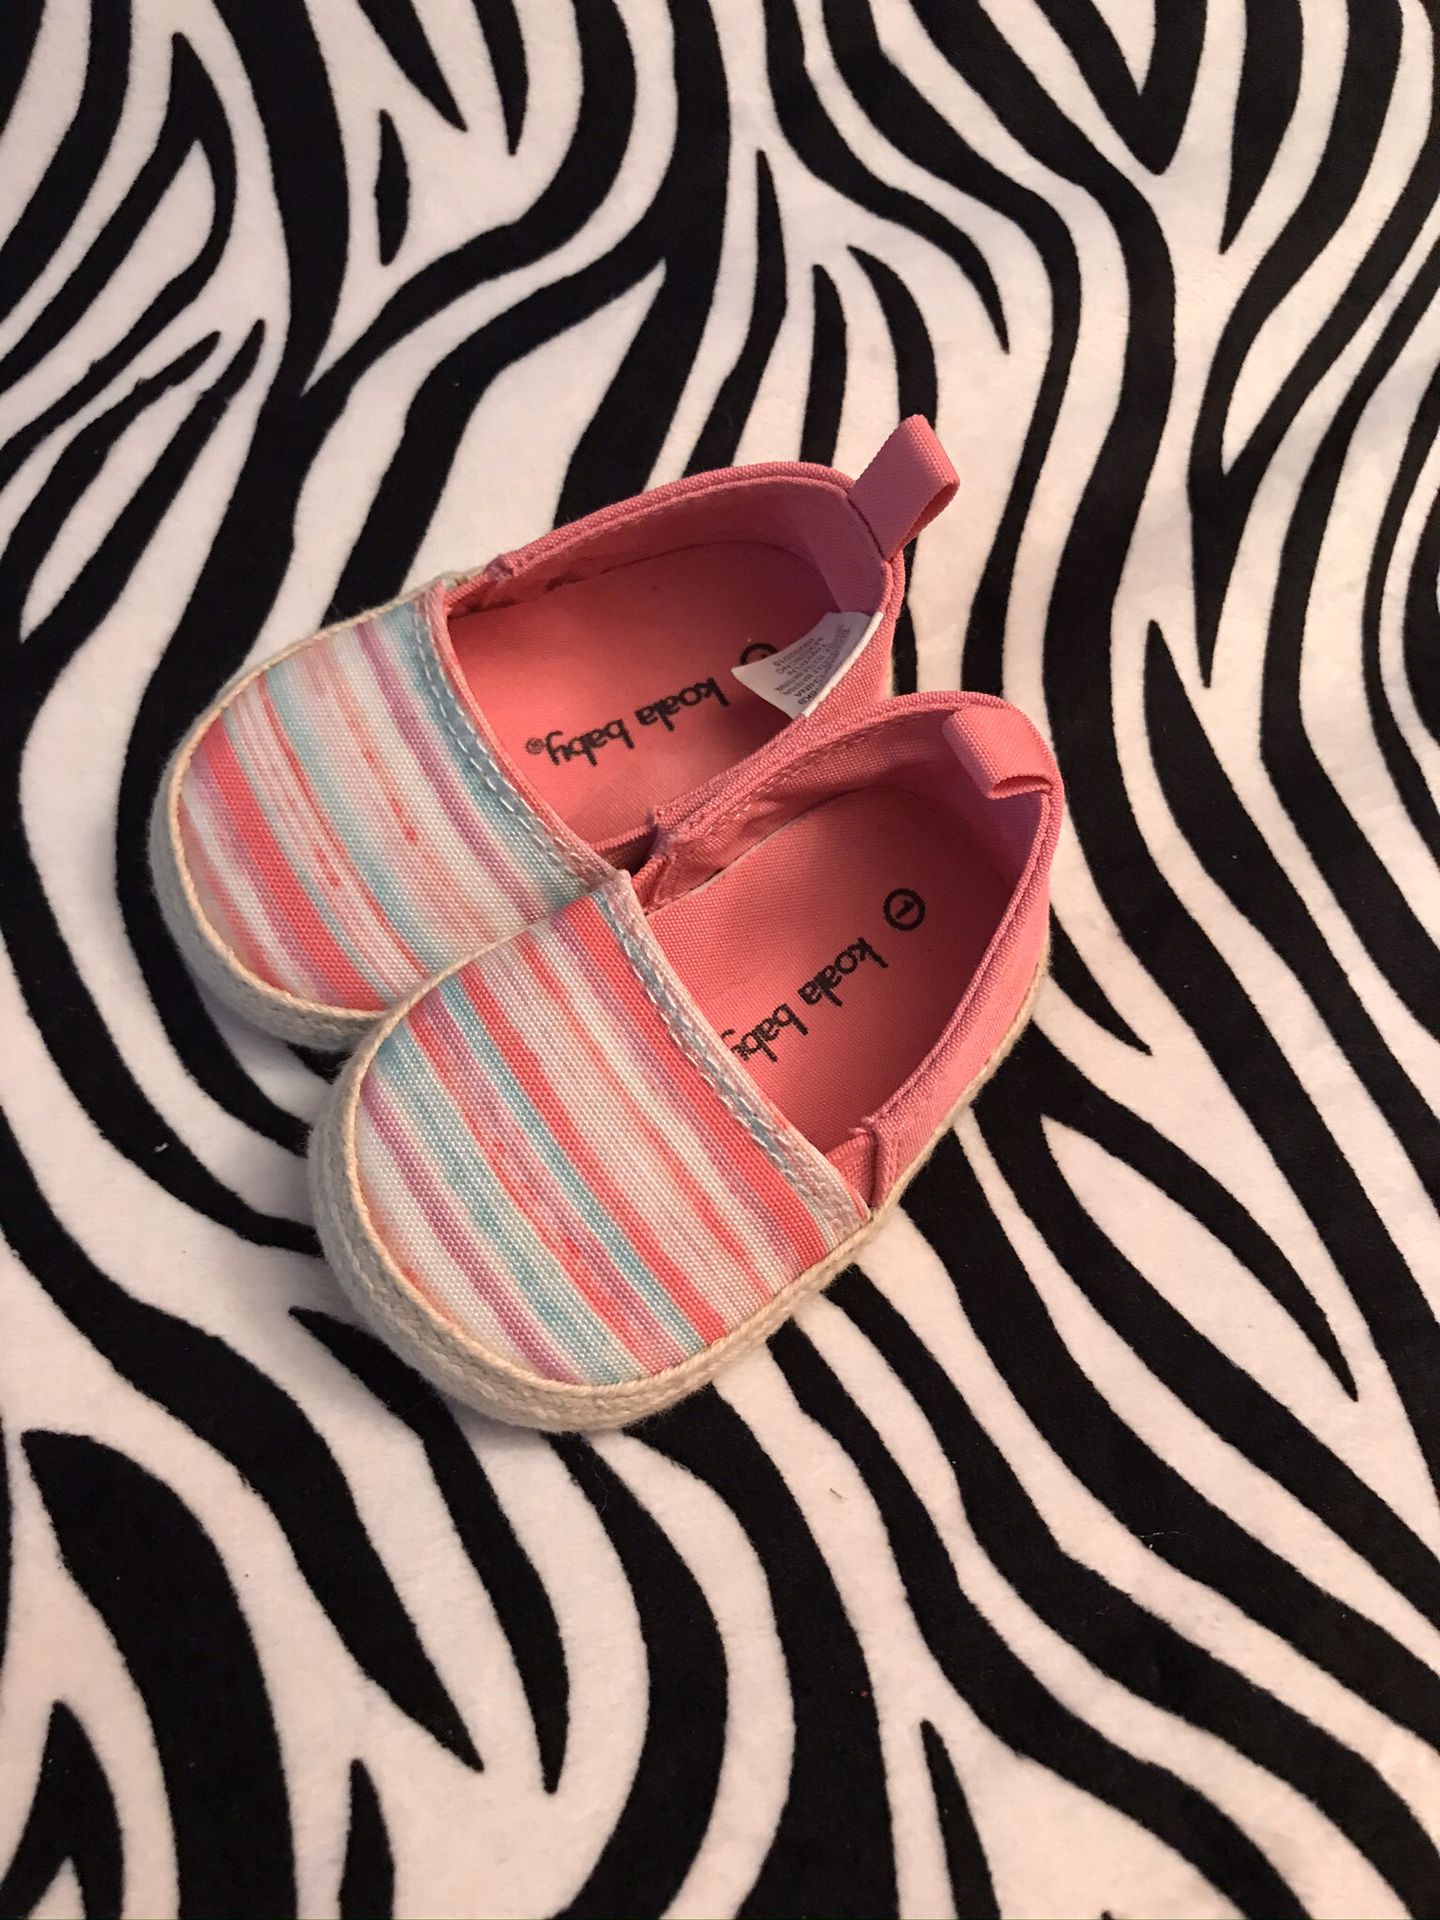 Baby size 1c shoes